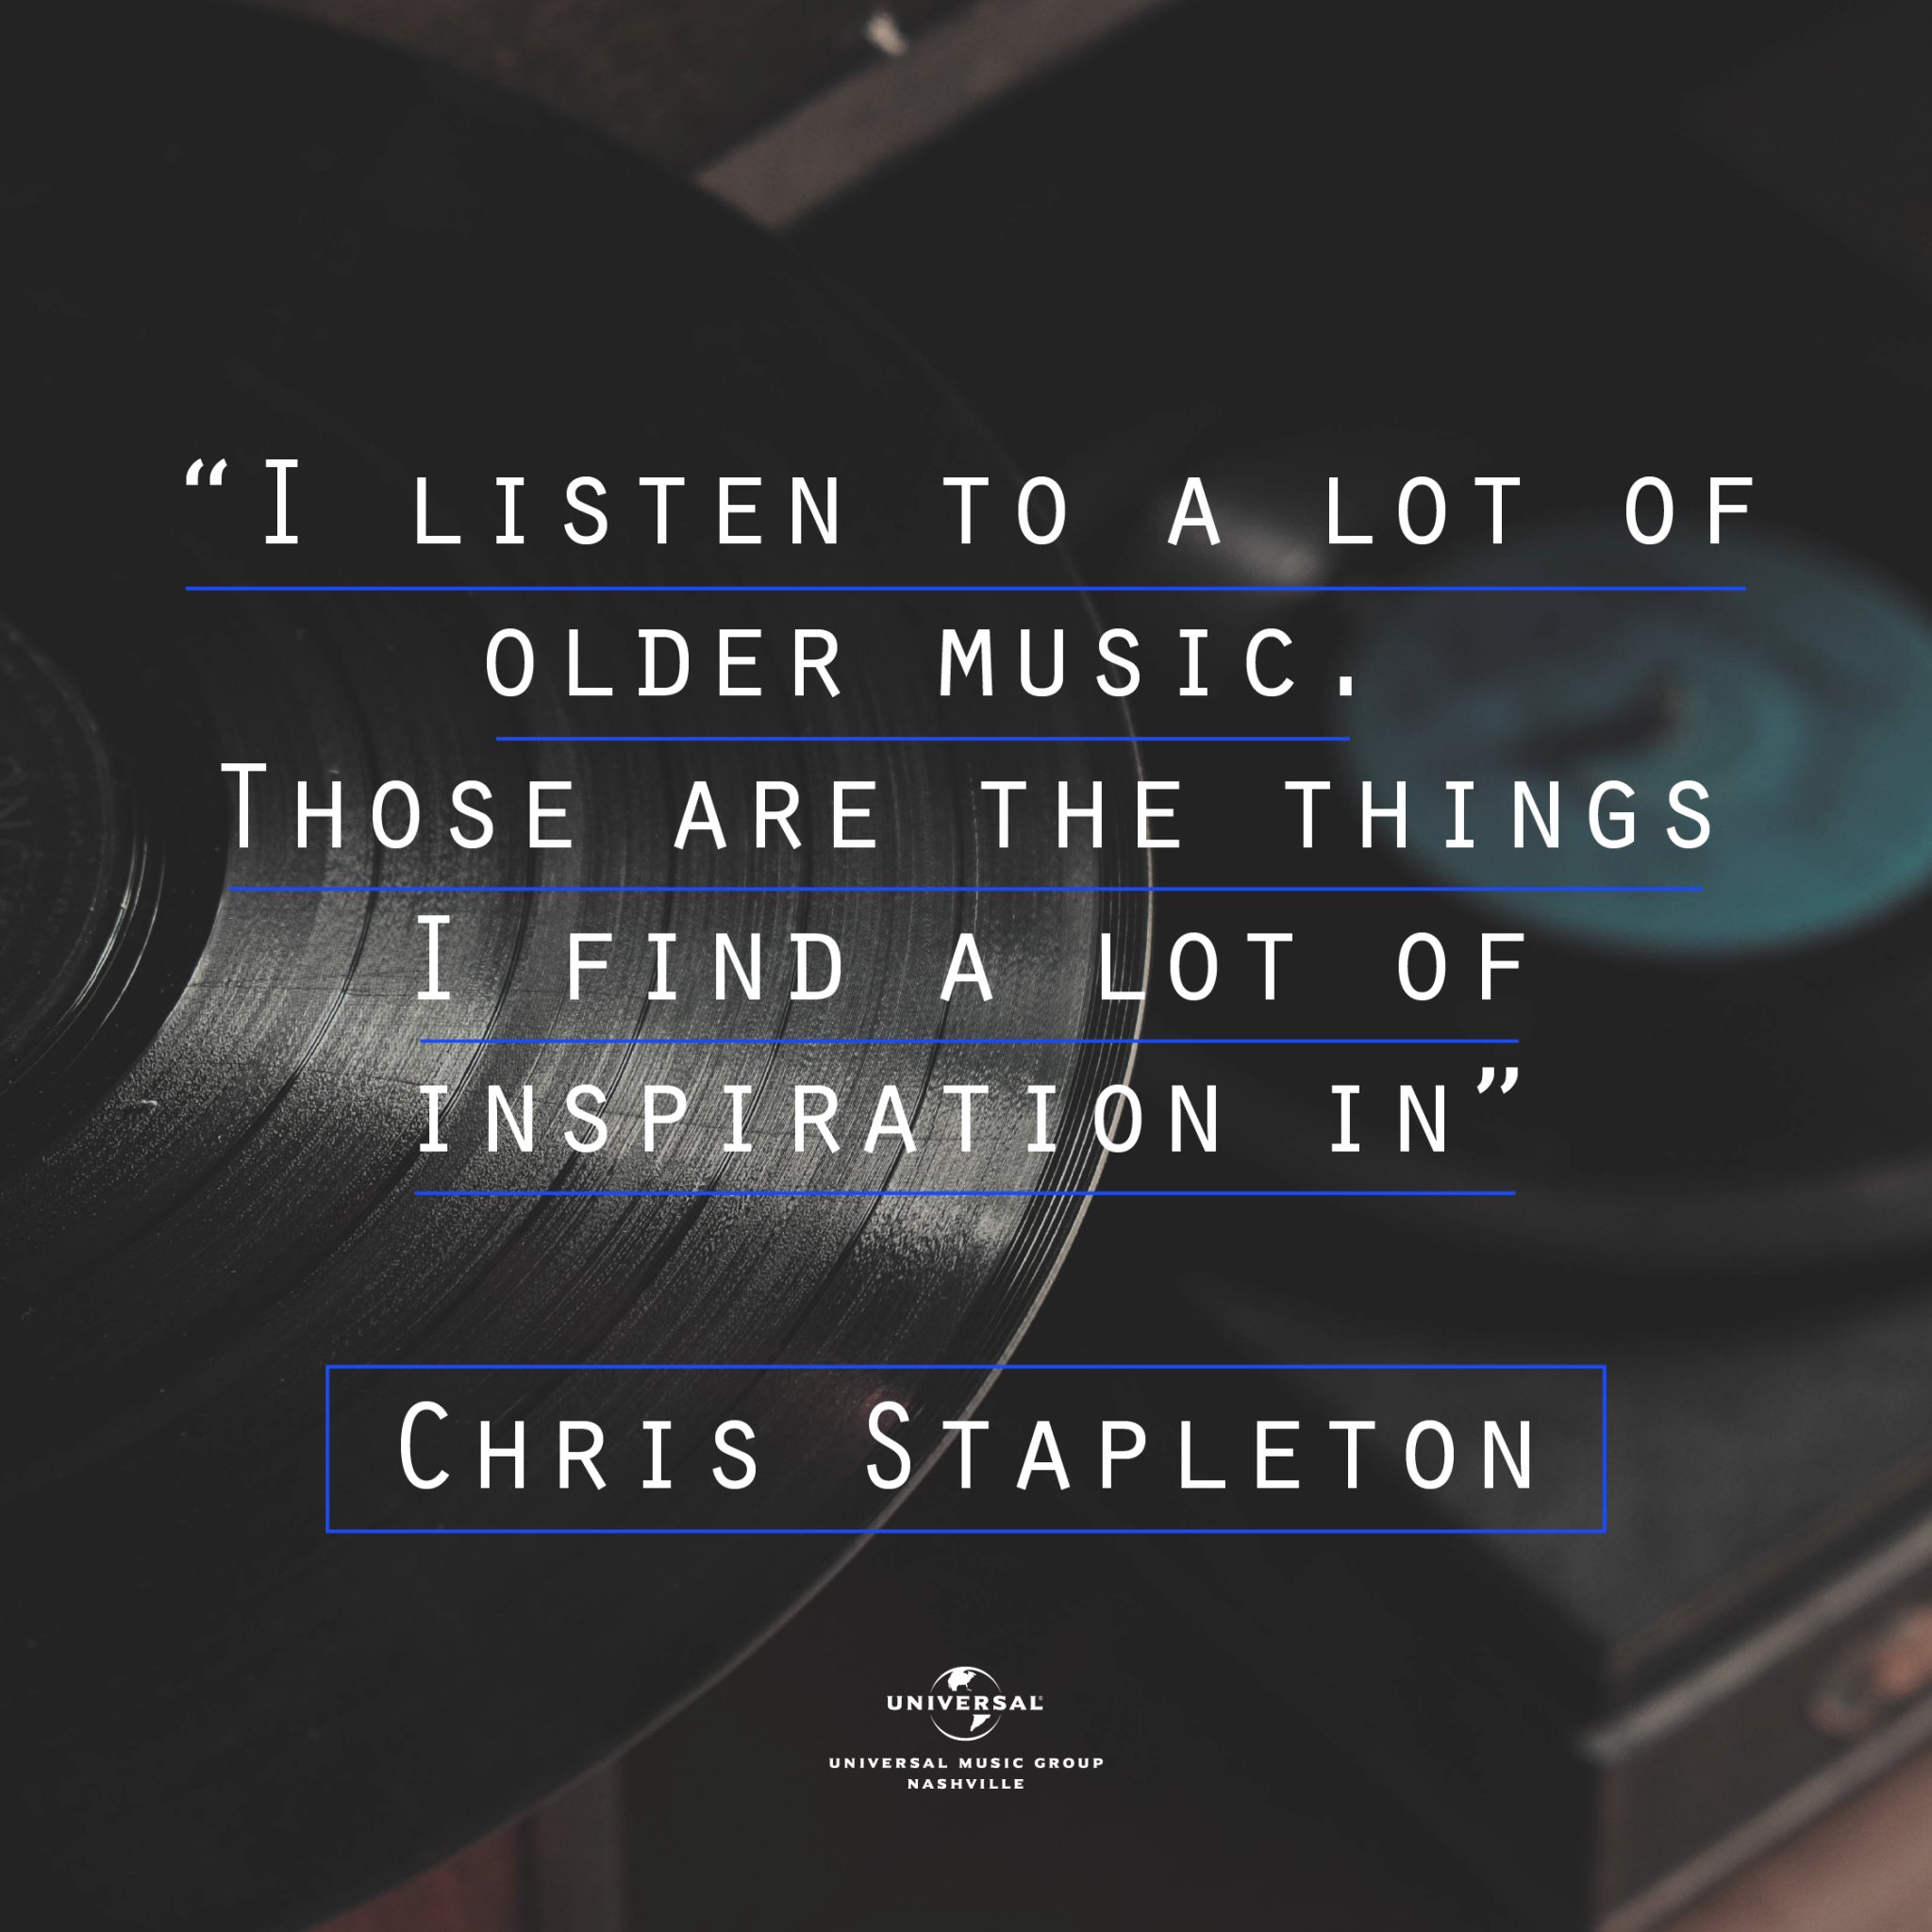 "I listen to a lot of older music. Those are the things I find a lof of inspiration in." Chris Stapleton